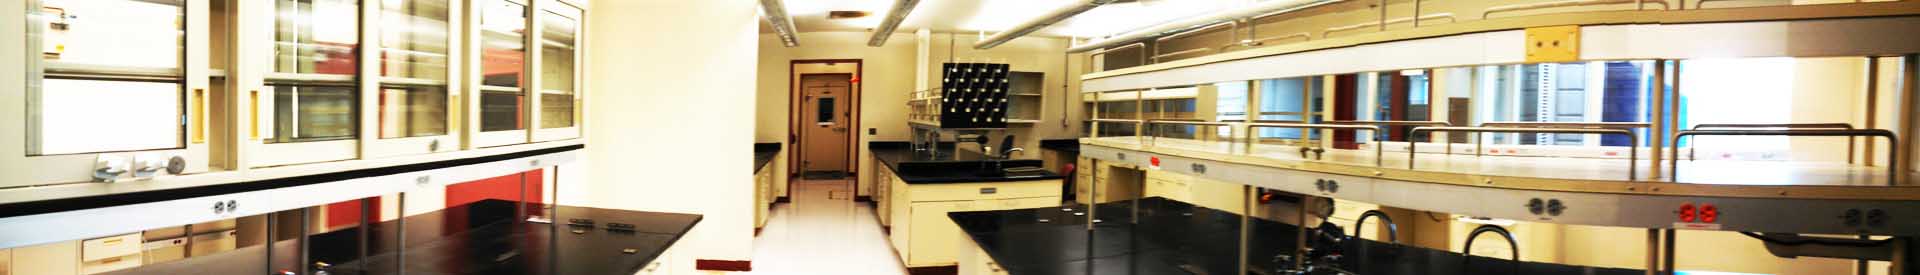 The Research Lab at JOINN Innovationb Park